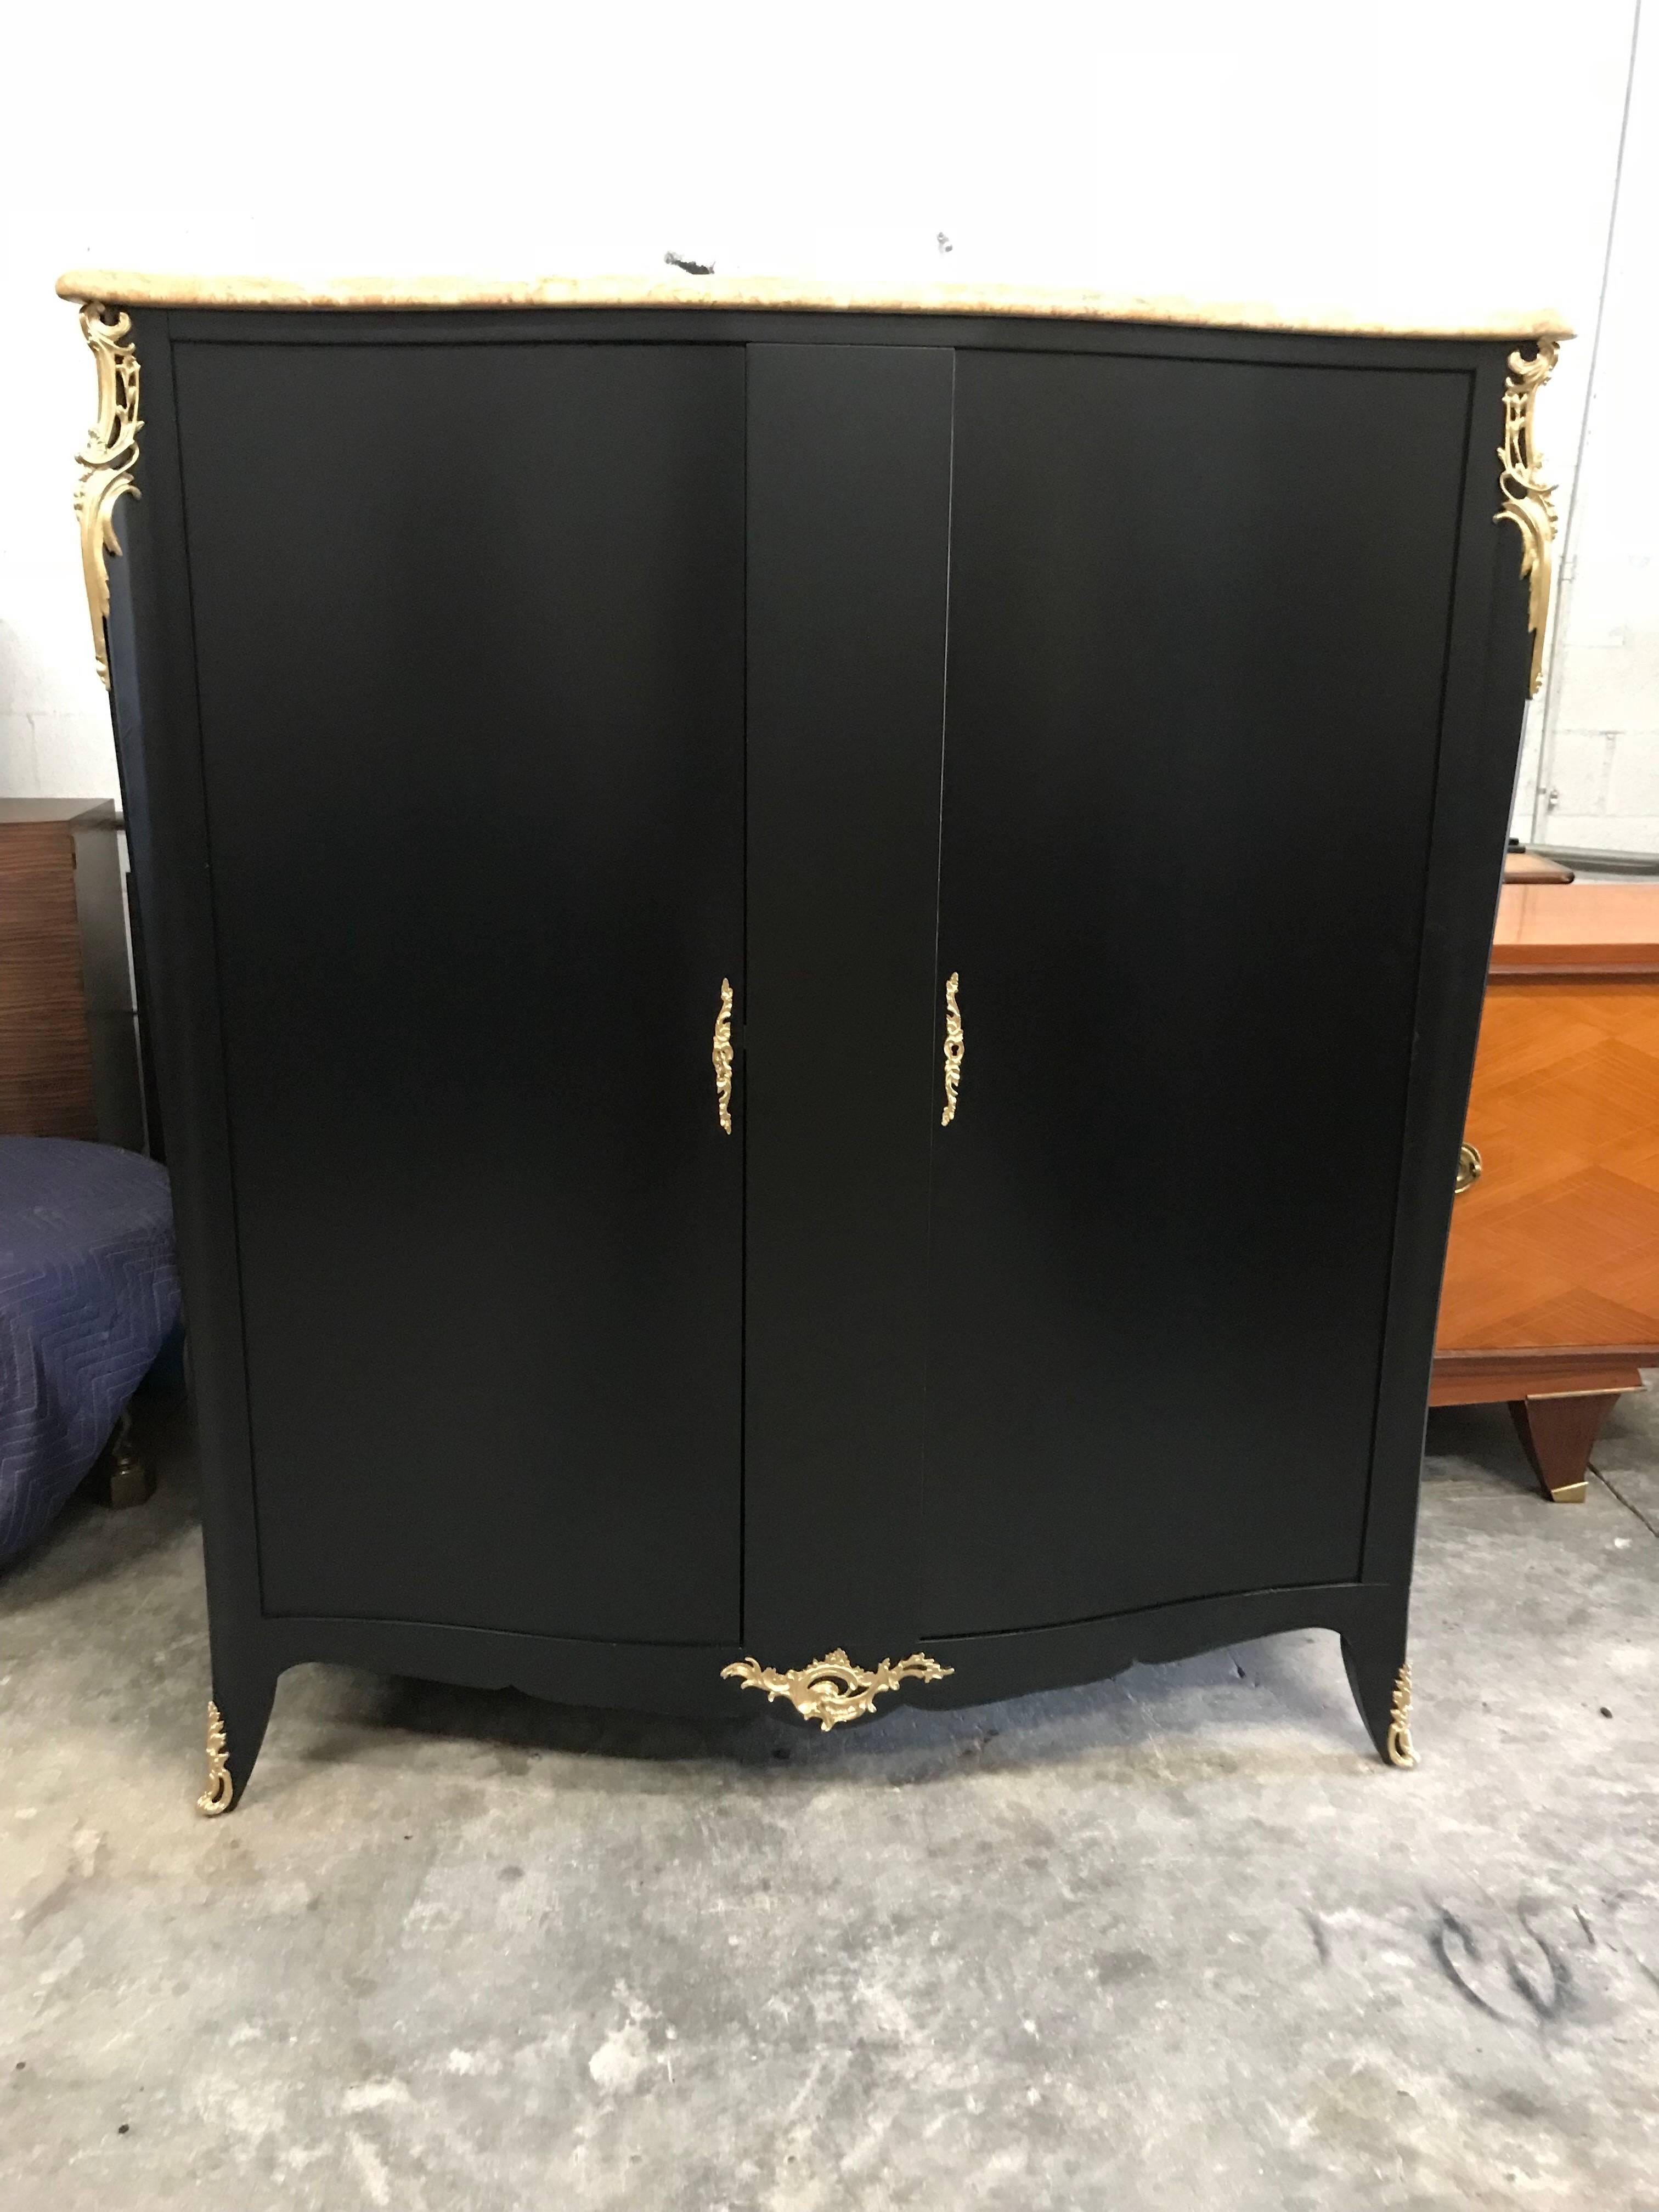 Monumental French Art Deco Ebonized Dry Bar Cabinet with Marble Top, 1940s For Sale 4